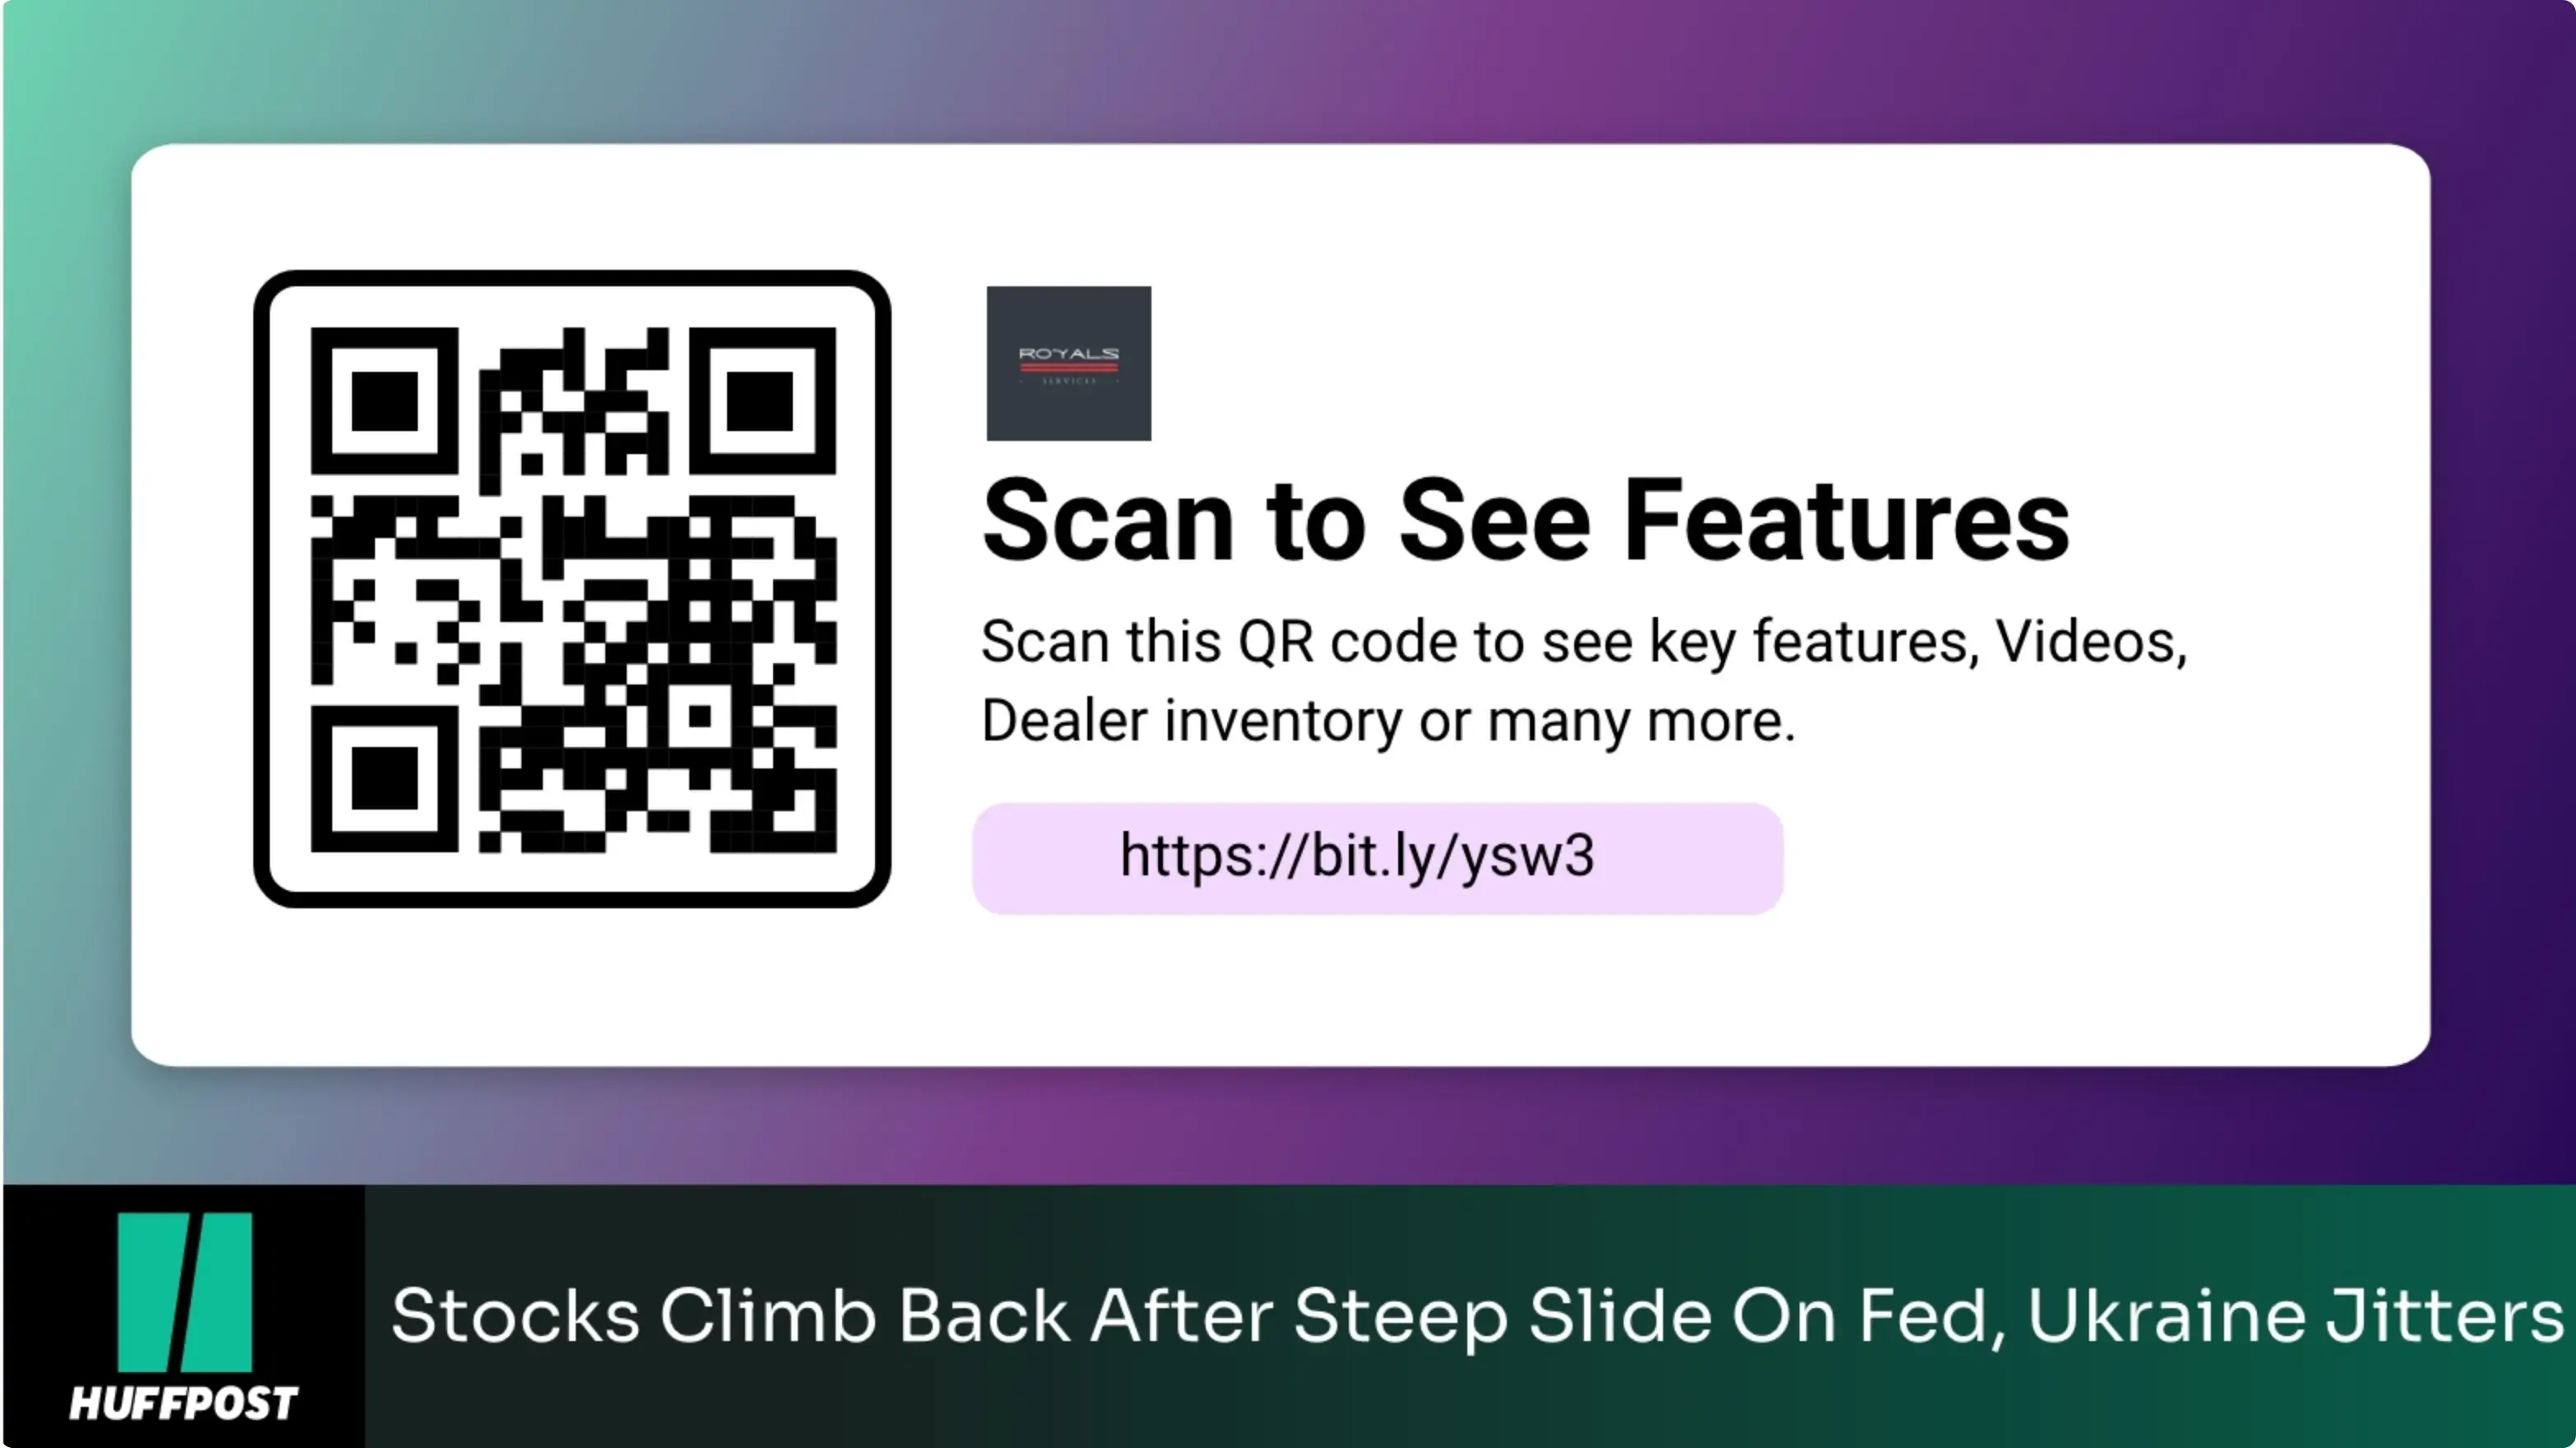 digital signage software interface showing composition  layout with Huffpost Newes app and QR code app contents